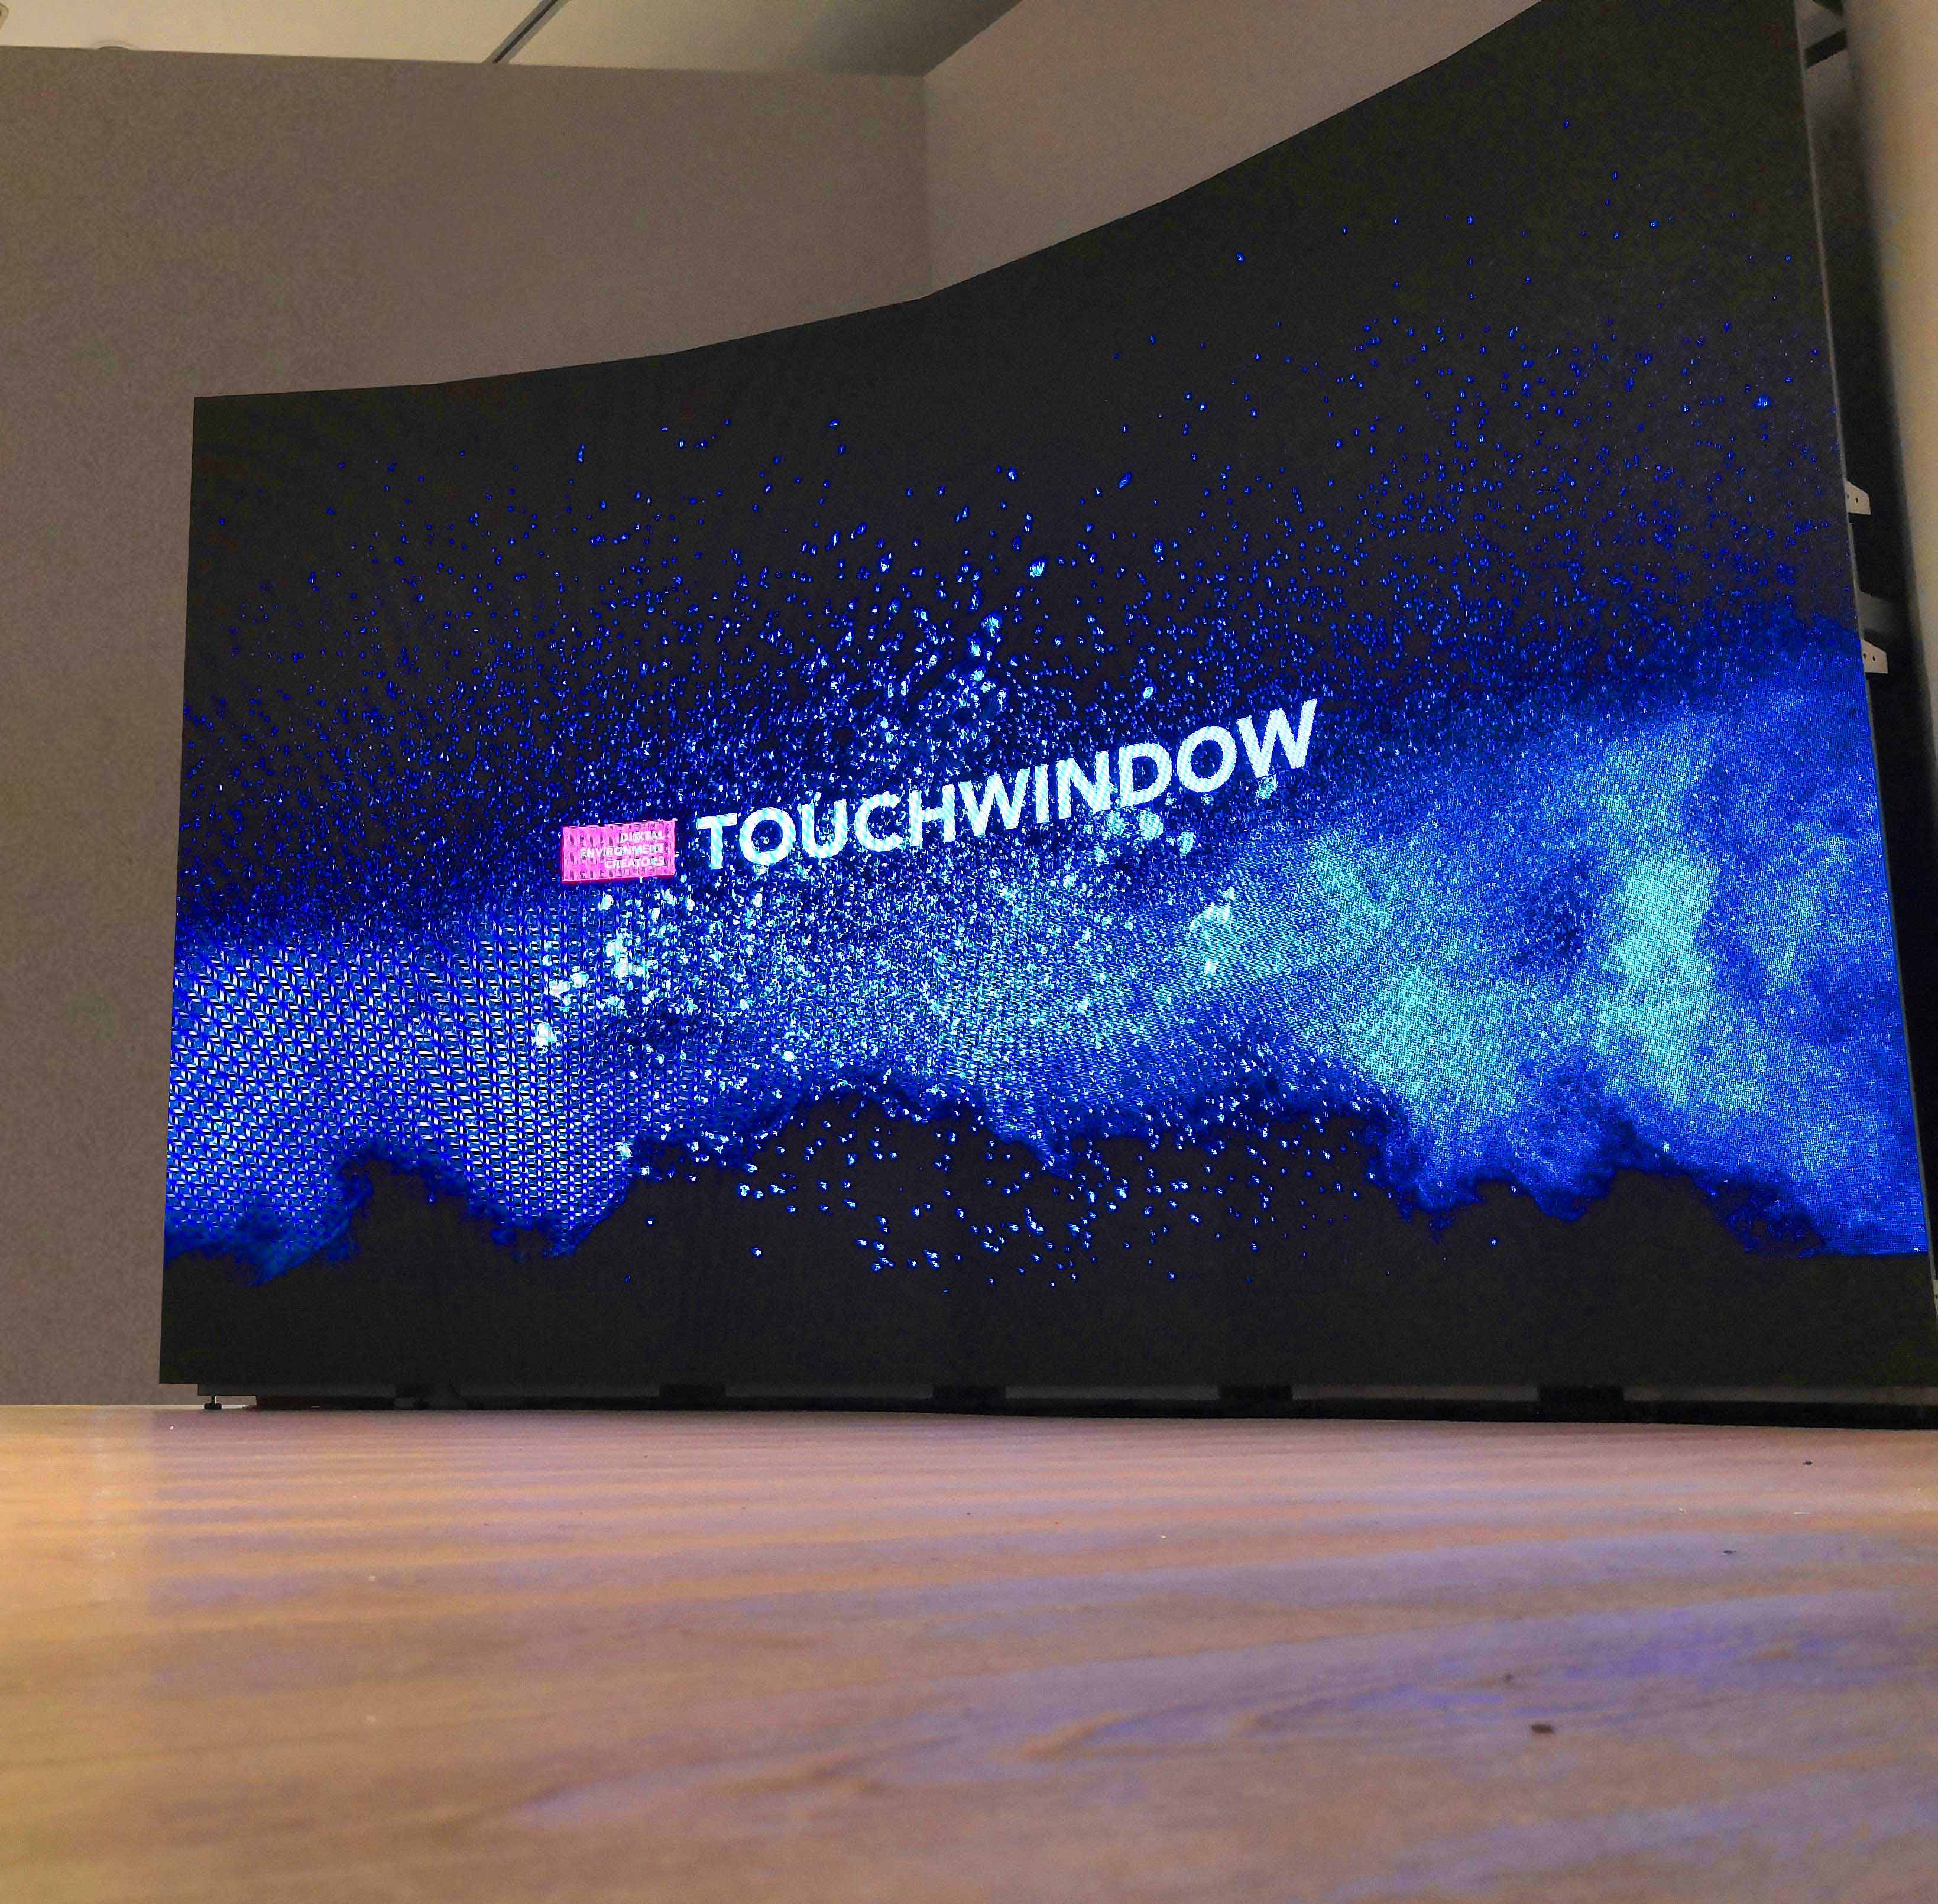 Touchwindow - Curved ledwall installed in just 5 days